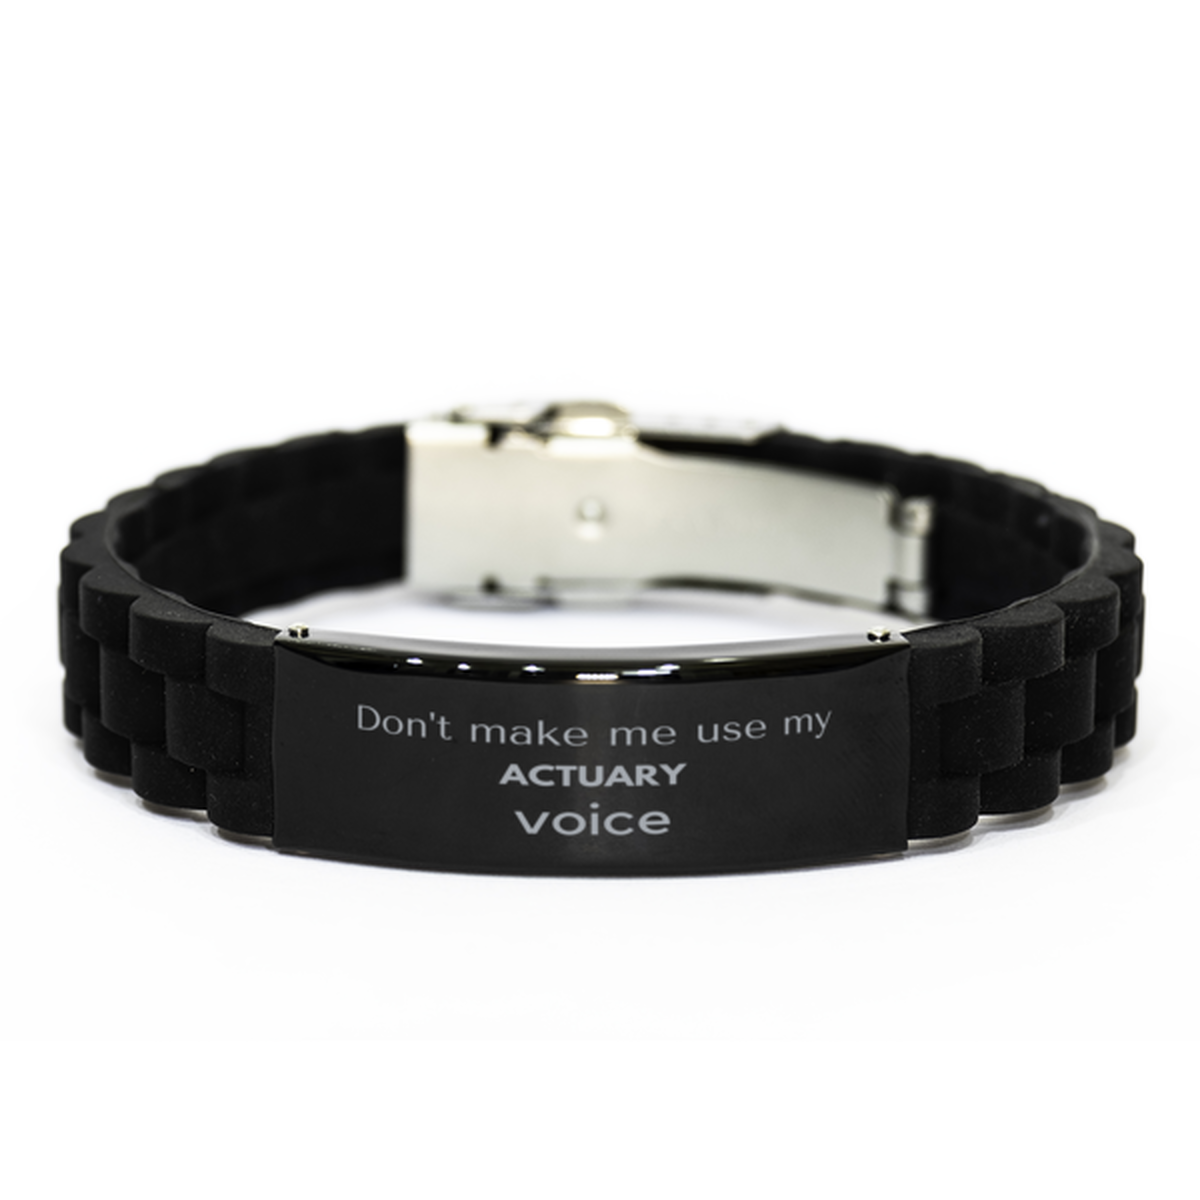 Don't make me use my Actuary voice, Sarcasm Actuary Gifts, Christmas Actuary Black Glidelock Clasp Bracelet Birthday Unique Gifts For Actuary Coworkers, Men, Women, Colleague, Friends